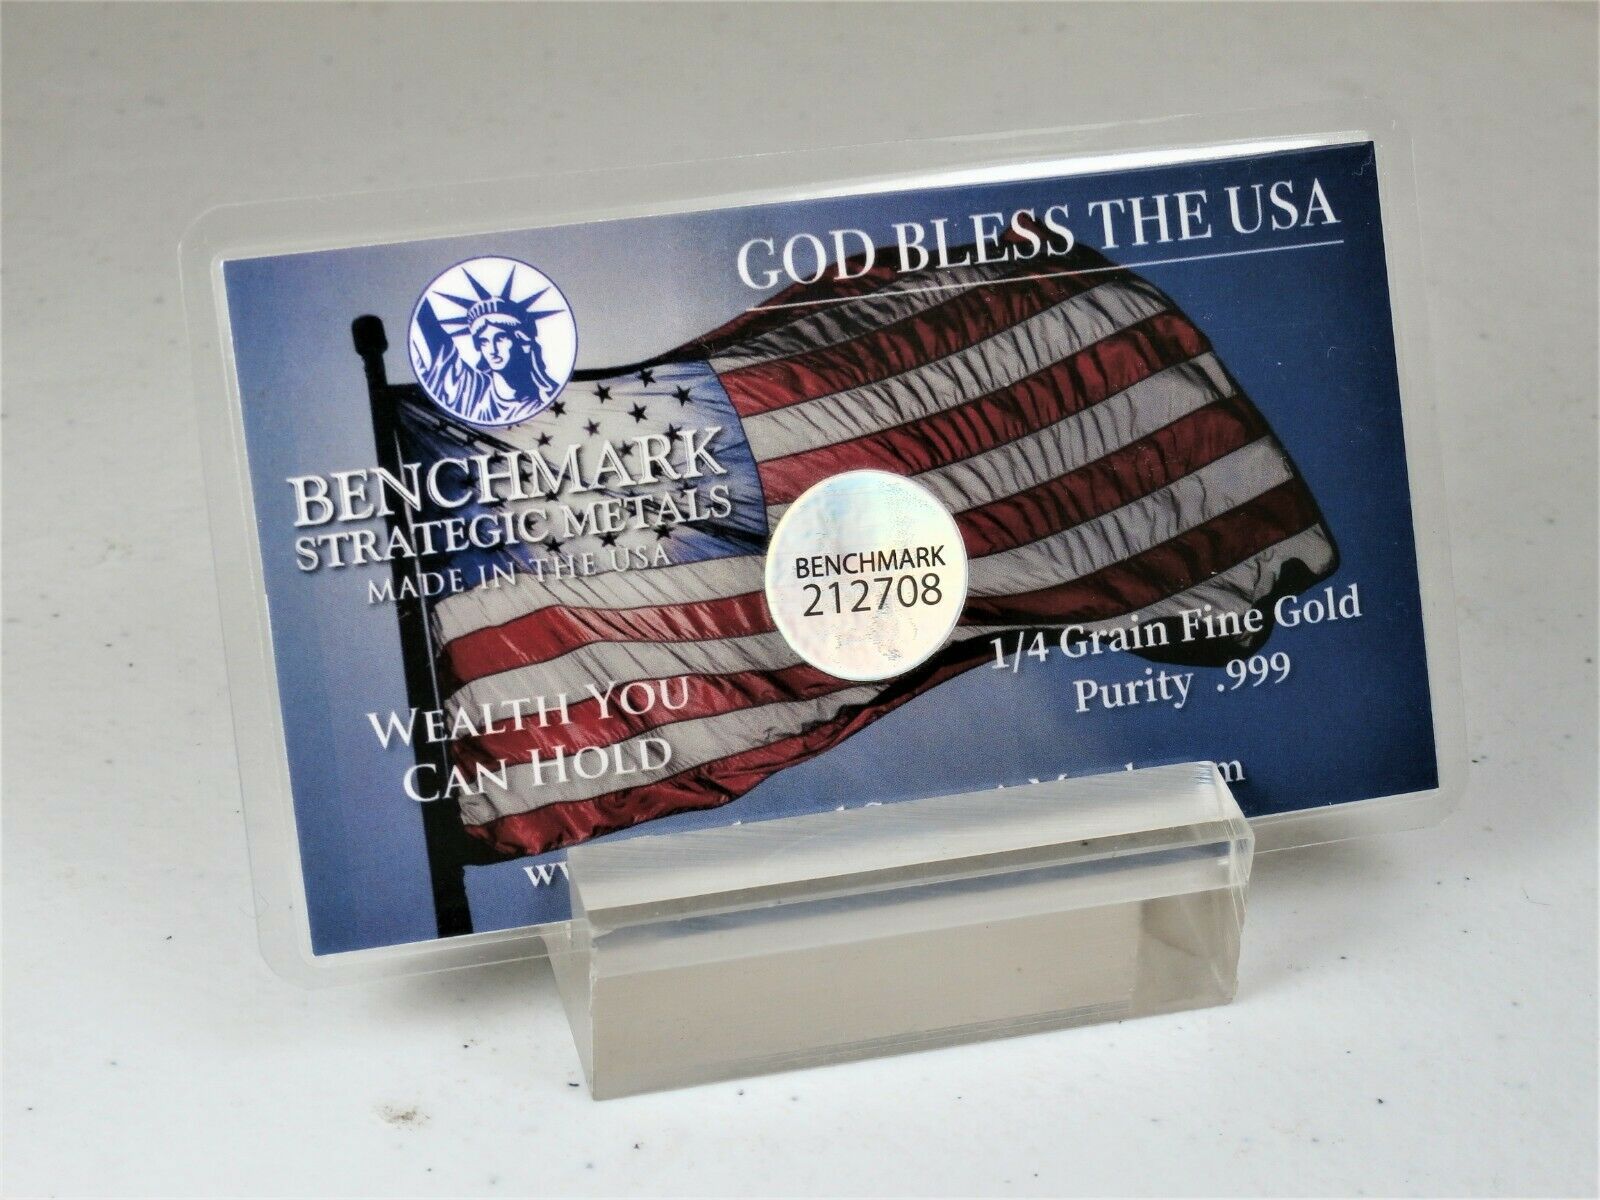 10 X 1/4 GRAIN .9999 FINE 24K GOLD BULLION BARS “THANK YOU TO THOSE WHO HAVE SERVED” - IN COA CARD